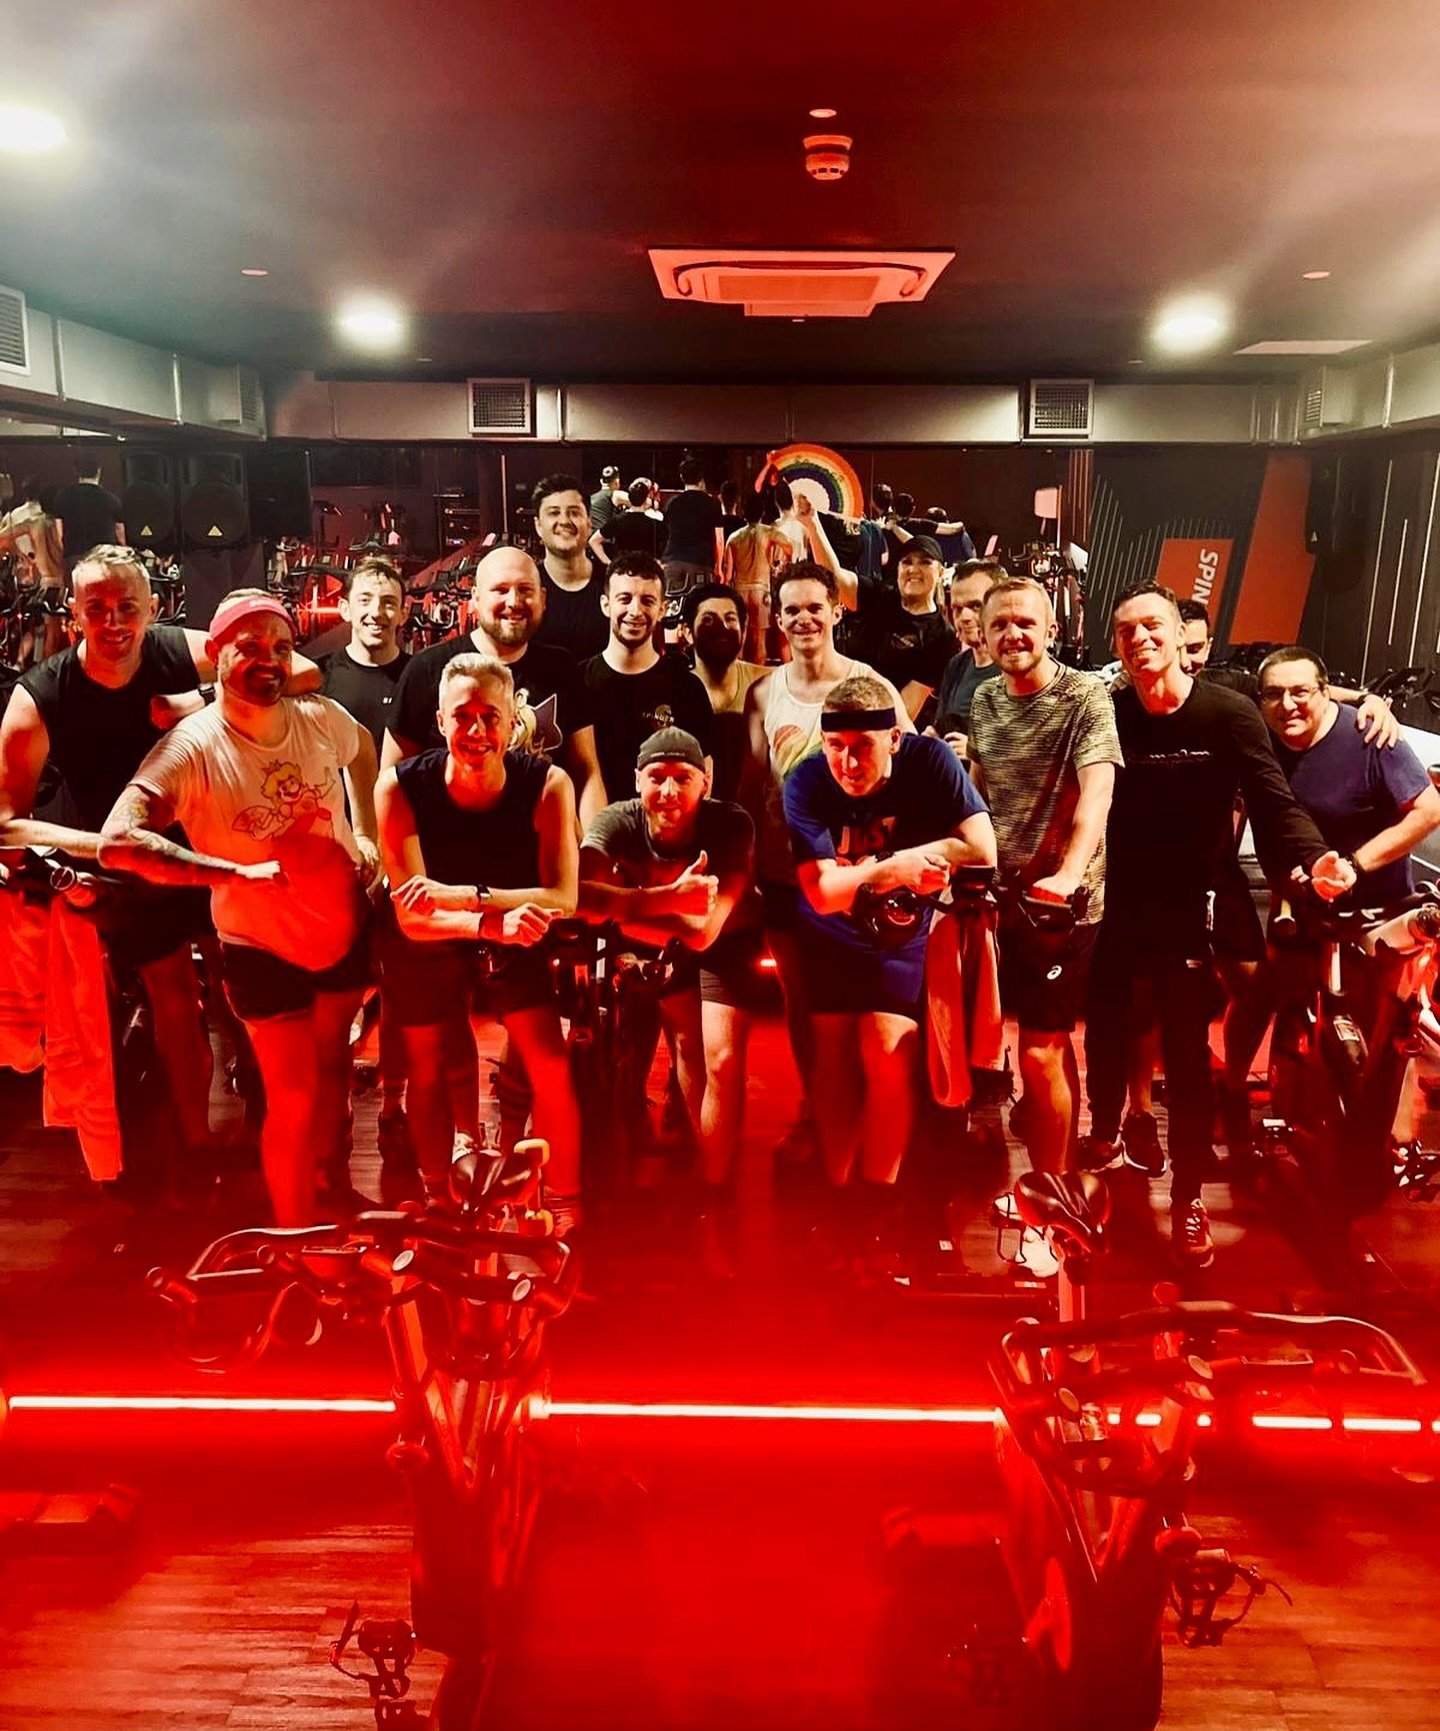 SUNDAY SPIN + ROAST! 🔥🩷😇 Awesome to see so many of you at our monthly special! Today it was a Steps vs Liberty X epic playlist! Make sure to book onto our June calendar now! #spinder #lgbtfitness #gayuk #gaylondon #roastdinner #sundayroast